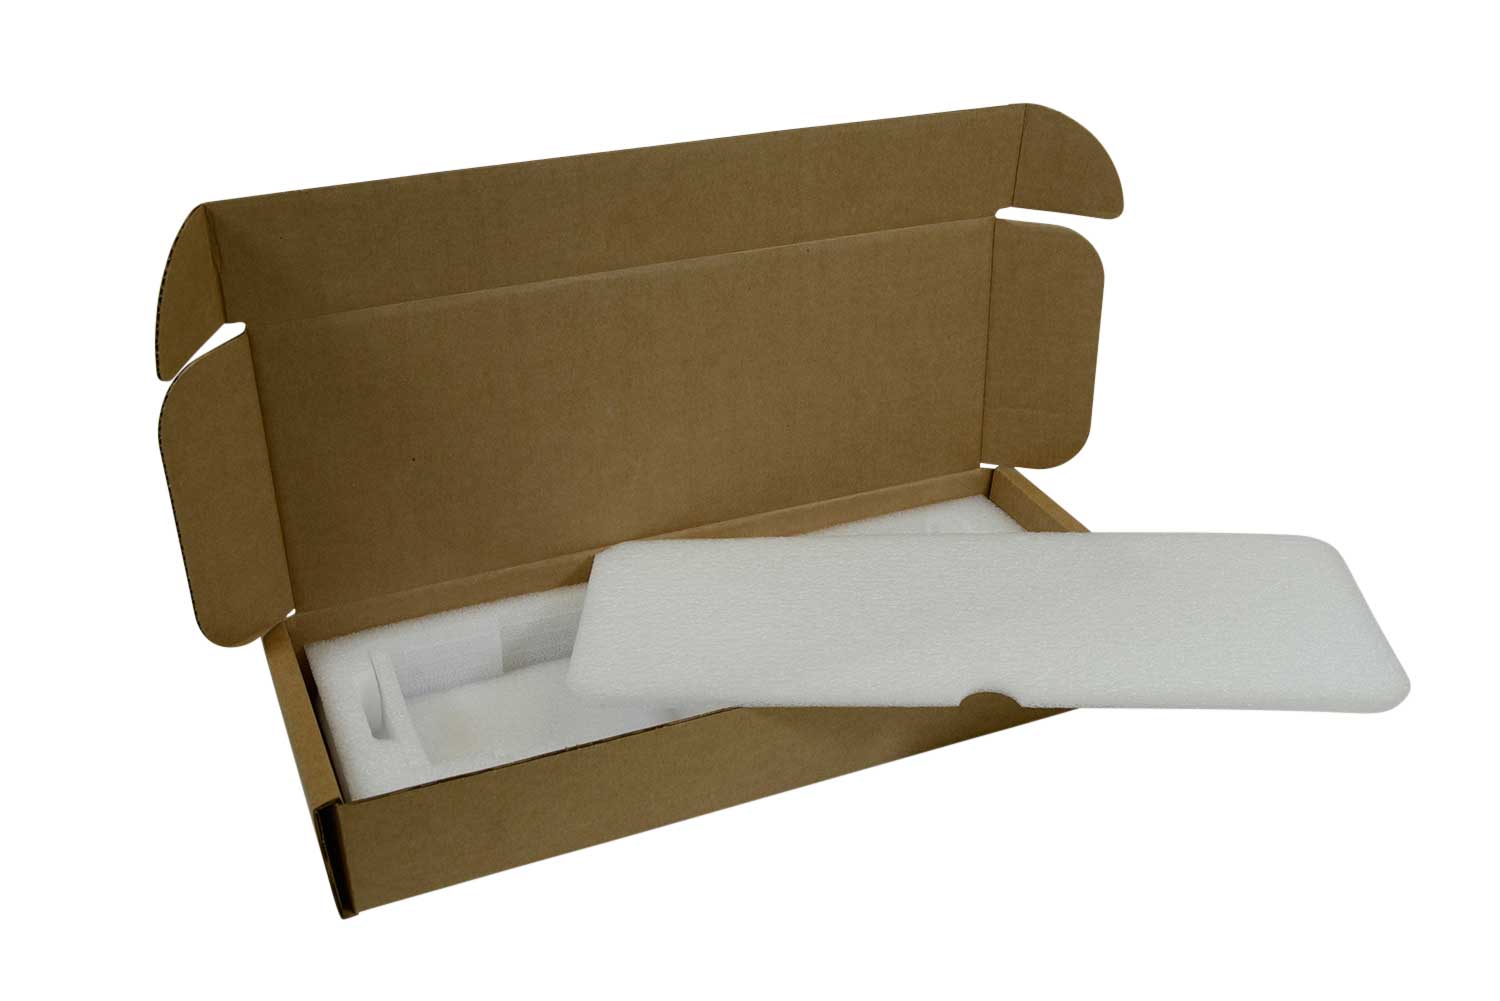 planet_protective_packaging_protective_packaging_hand_assembly_packaging_f